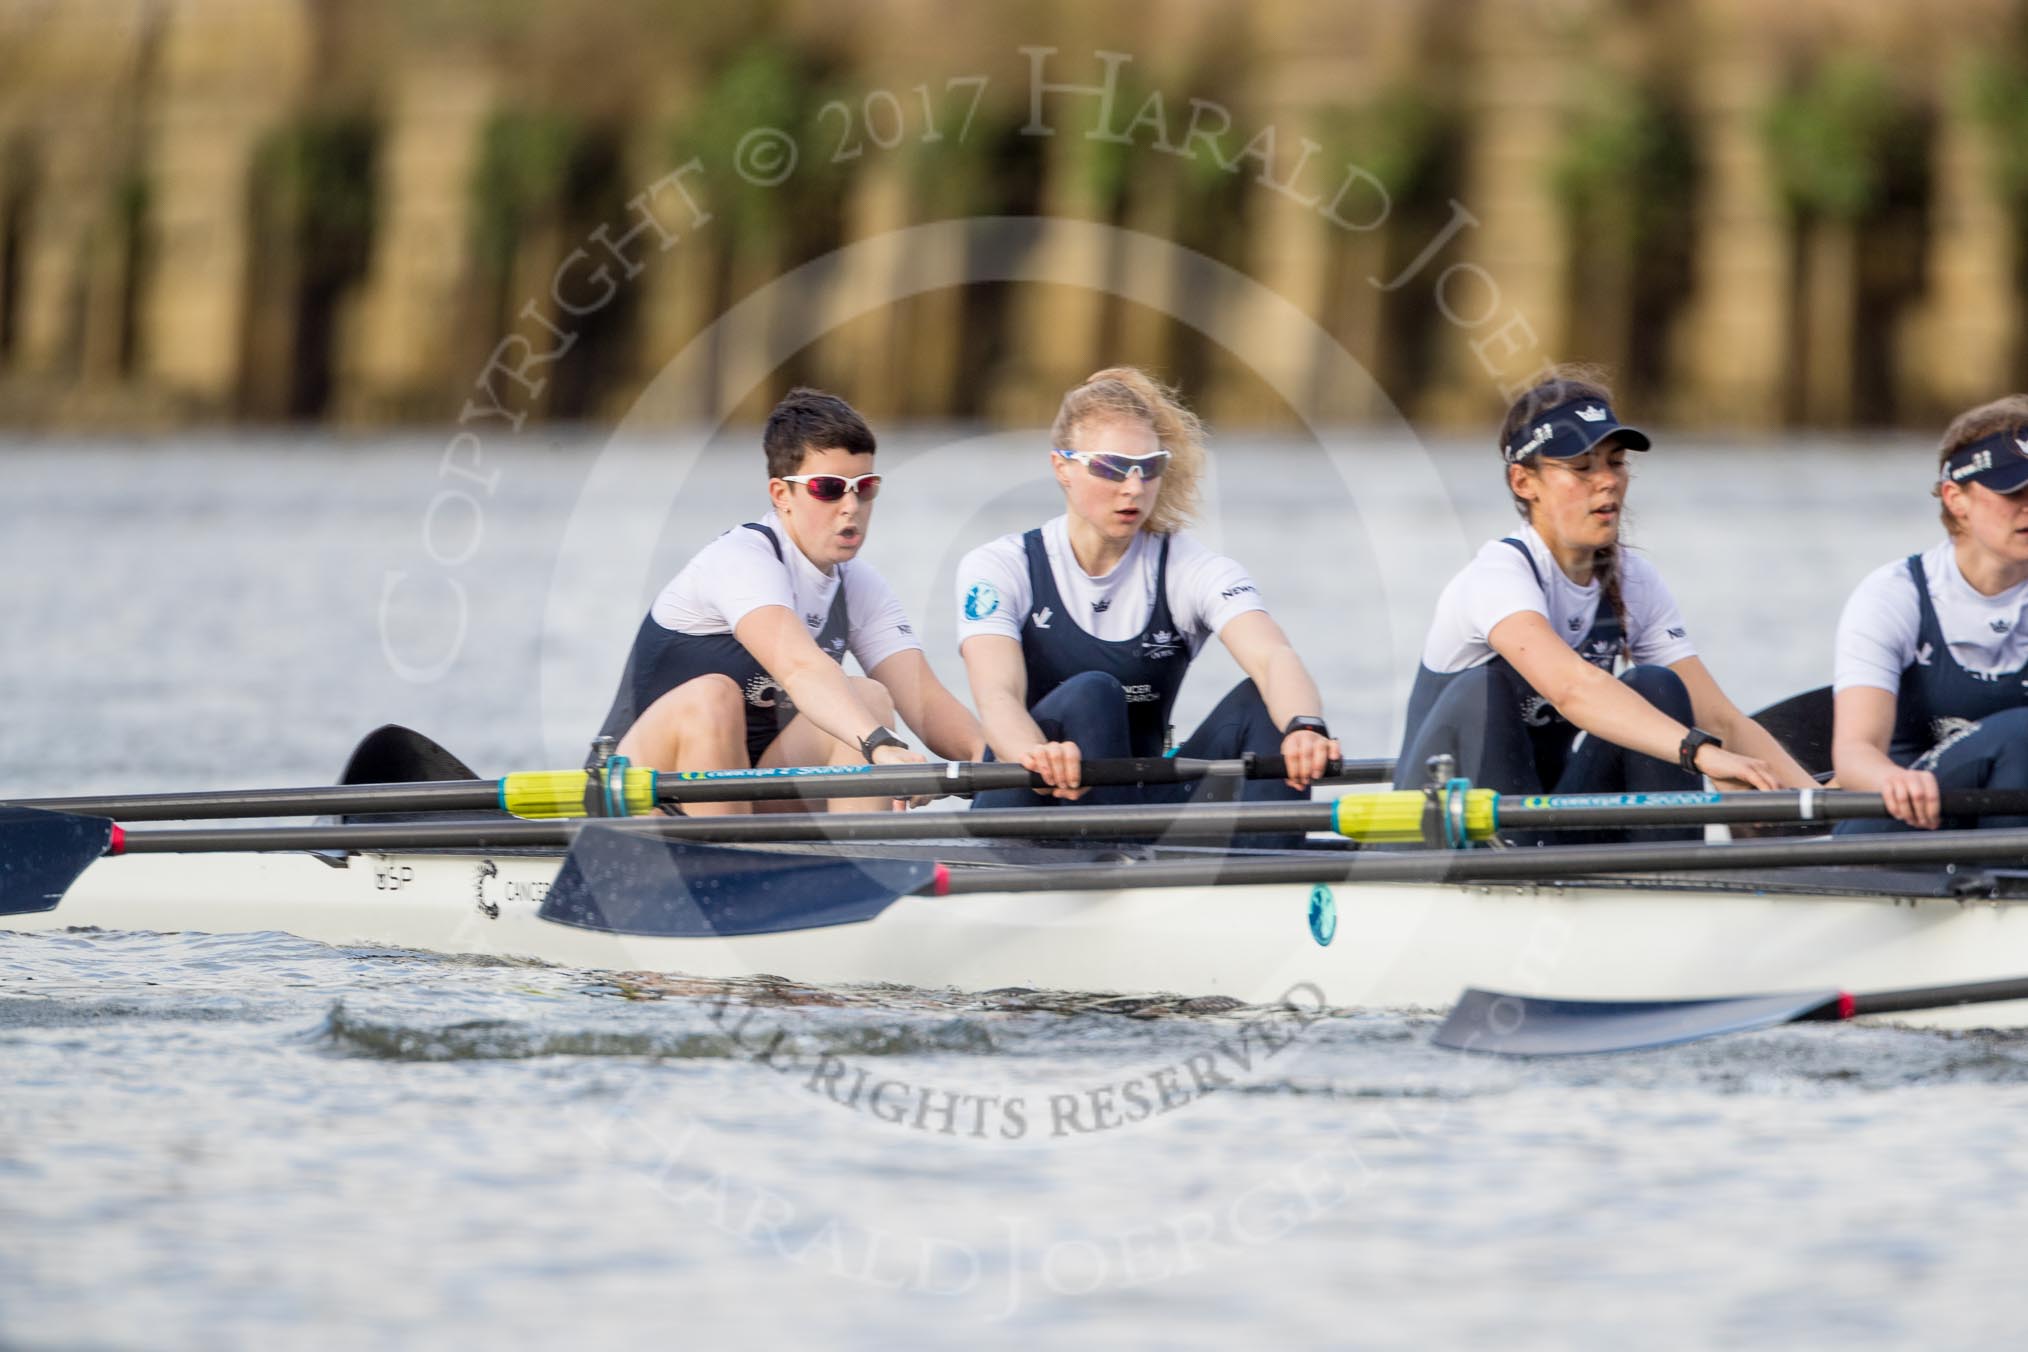 The Cancer Research UK Boat Race season 2017 - Women's Boat Race Fixture OUWBC vs Molesey BC: The OUWBC boat, here bow Alice Roberts, 2 Beth Bridgman, 3 Rebecca Te Water Naude, 4 Rebecca Esselstein.
River Thames between Putney Bridge and Mortlake,
London SW15,

United Kingdom,
on 19 March 2017 at 16:04, image #71